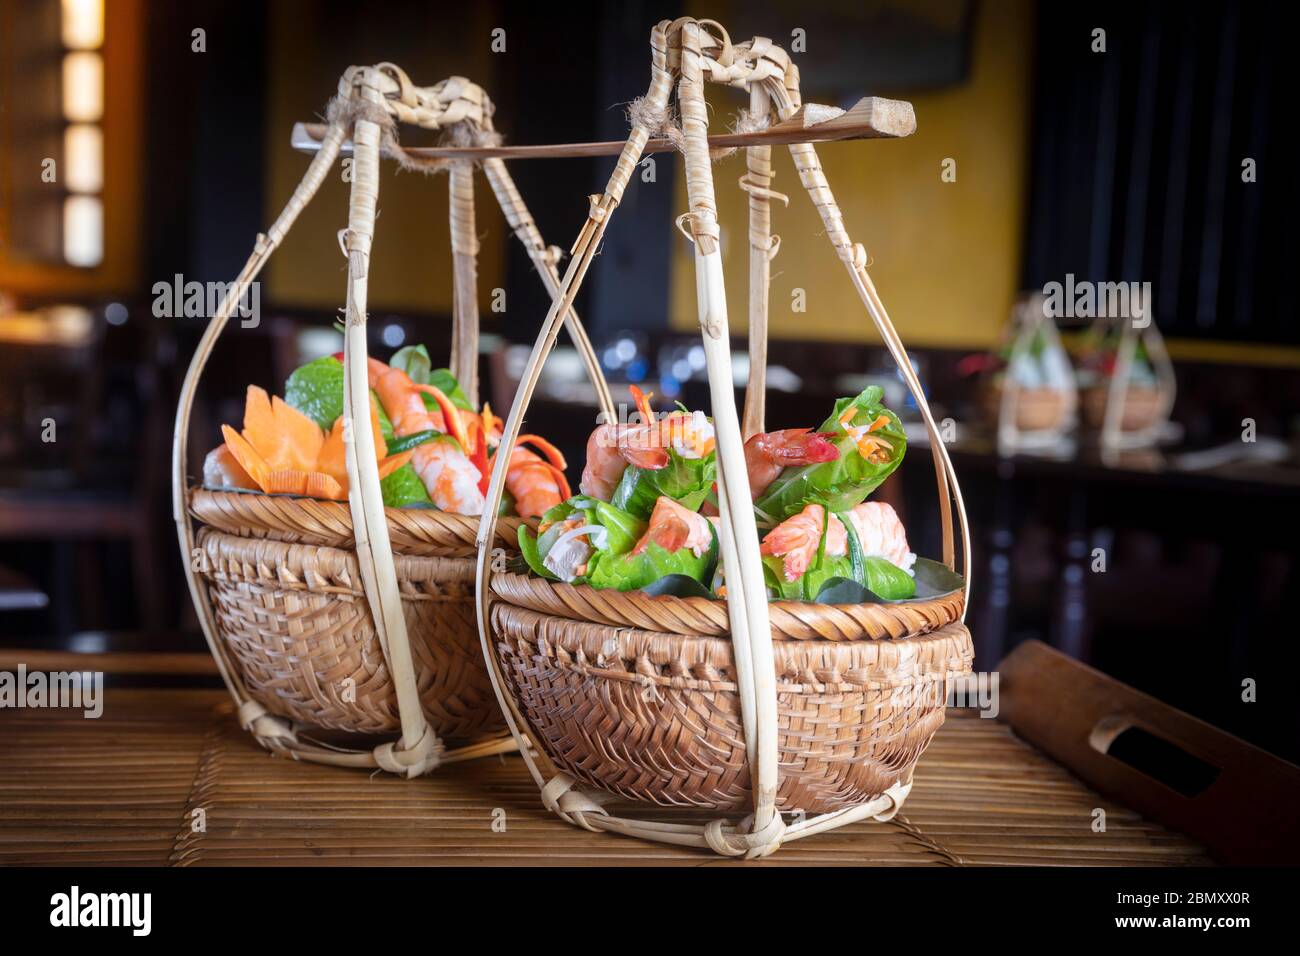 Vietnamese food served in traditional wicker baskets in a restaurant in Hoi An Stock Photo